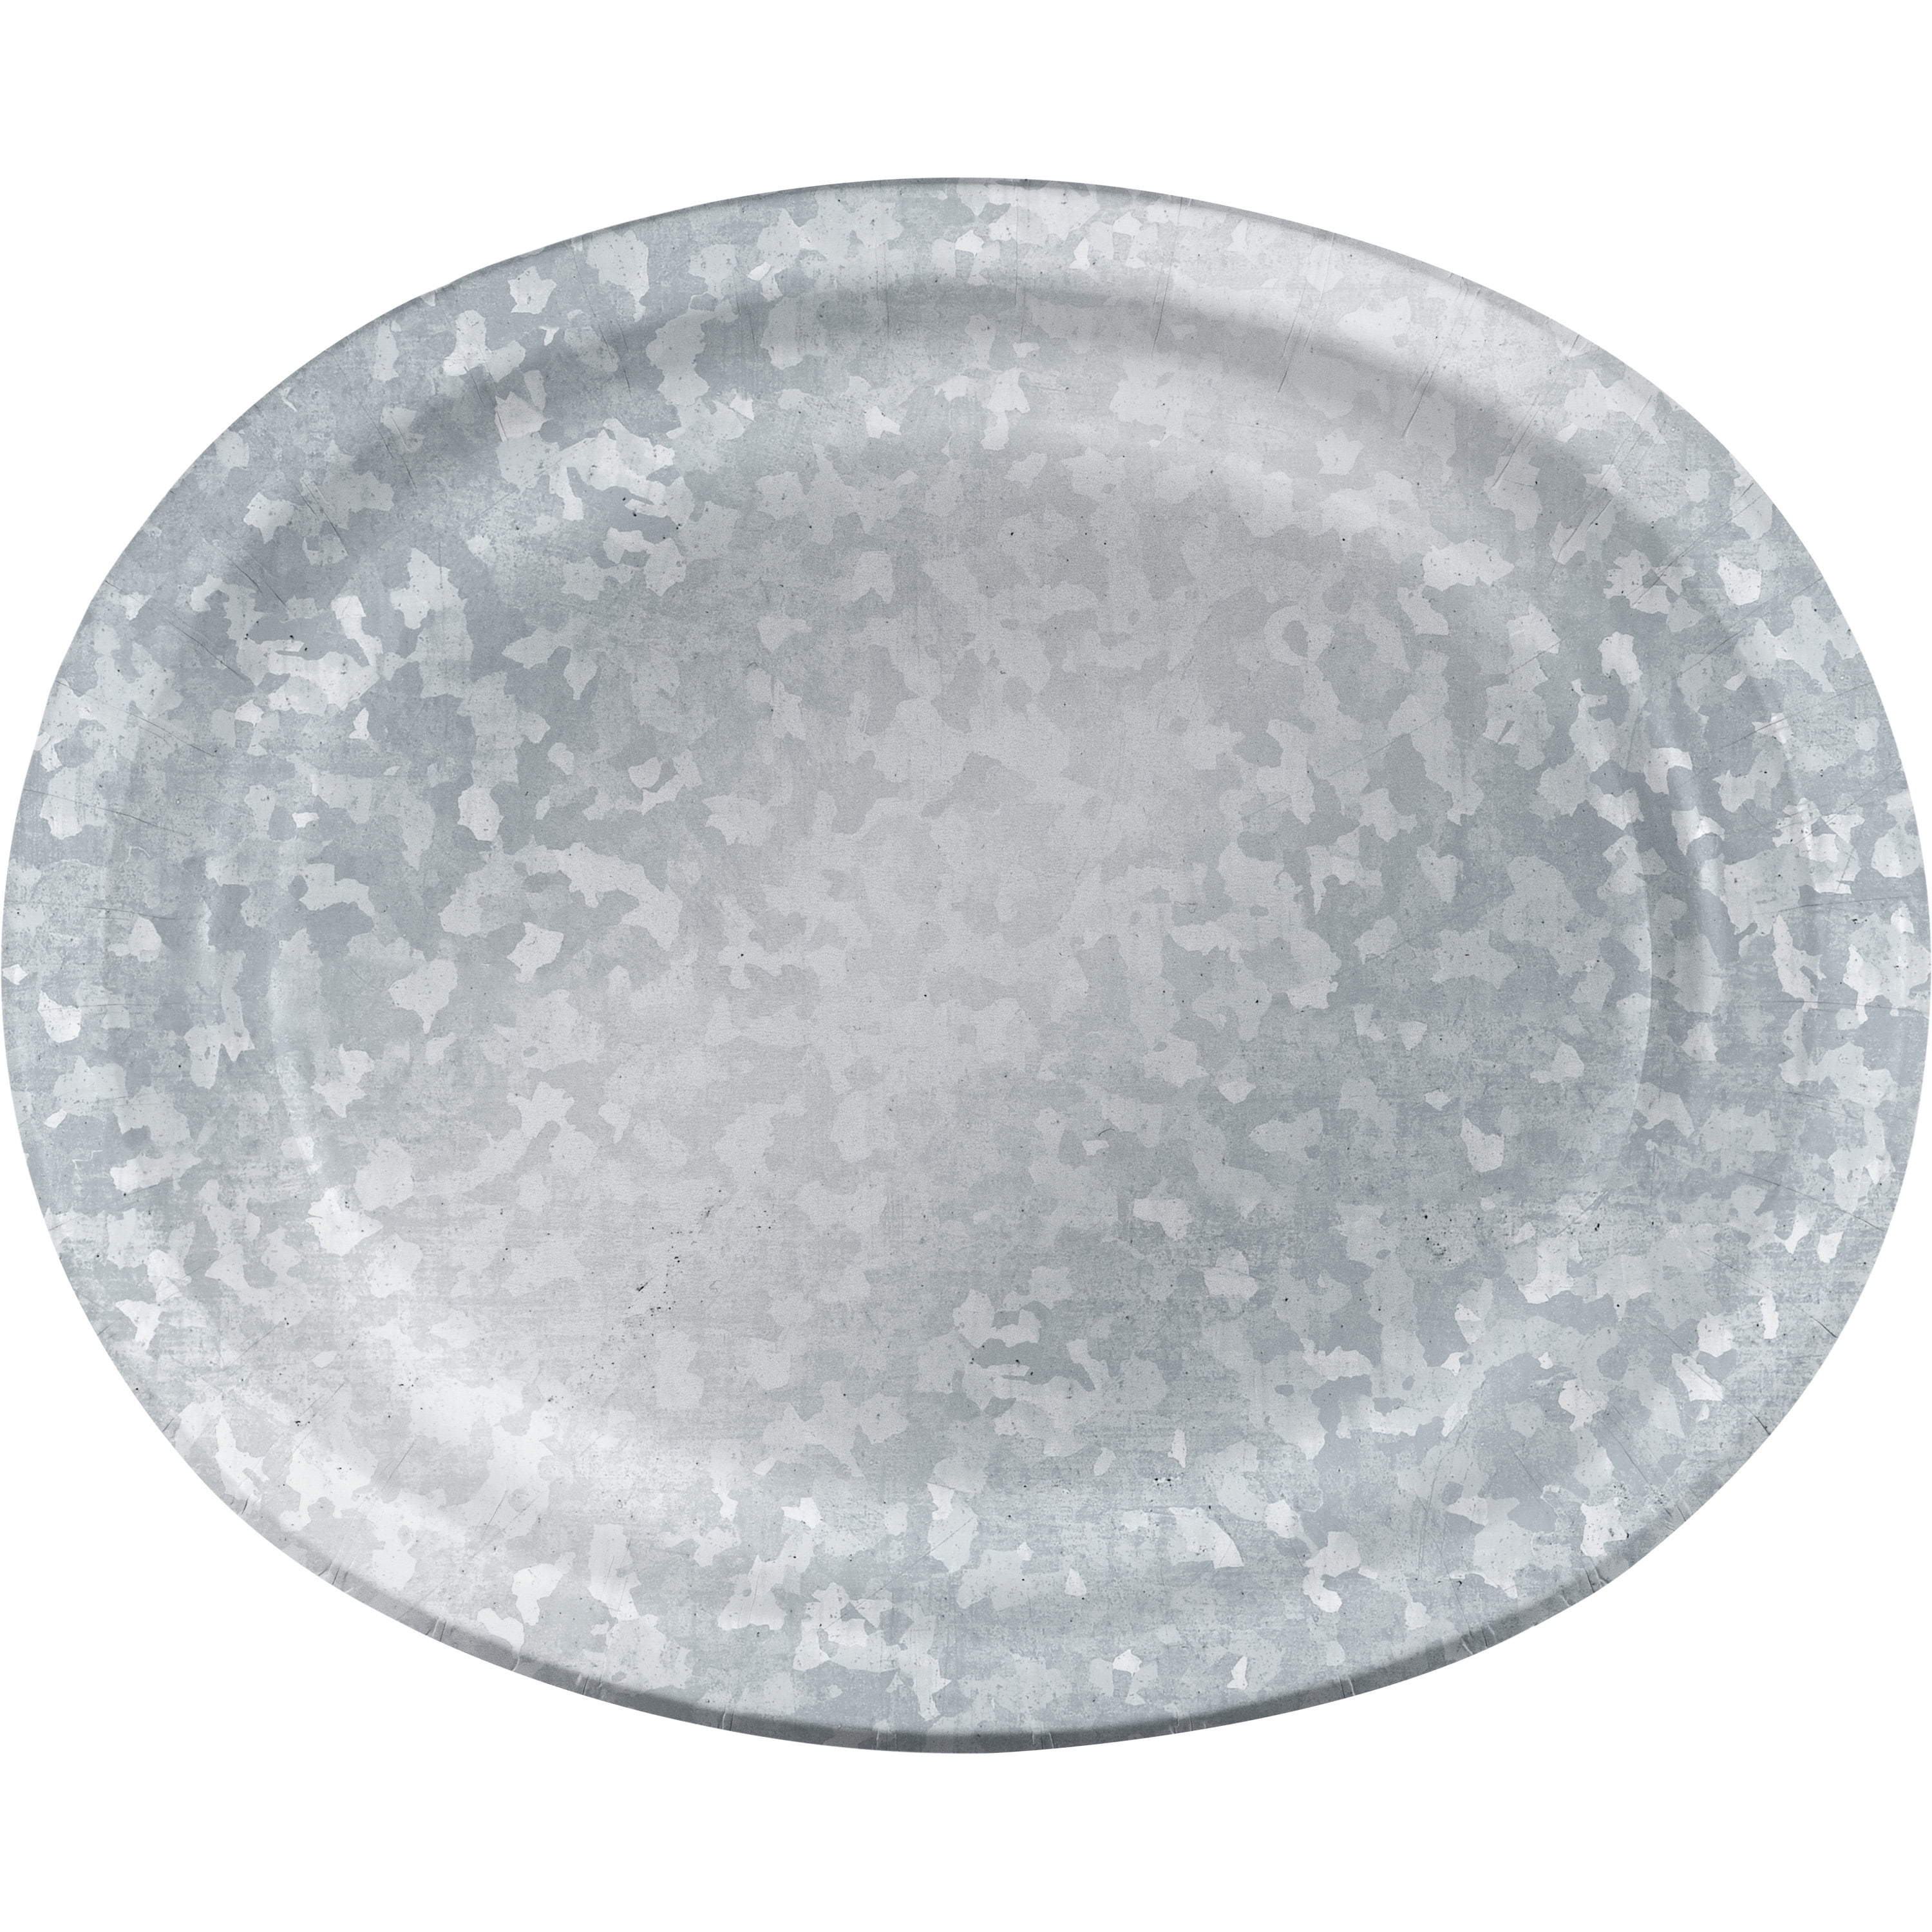 Disposable Oval Paper Dinner Plates – Pack of 25 Heavy Duty, 10 